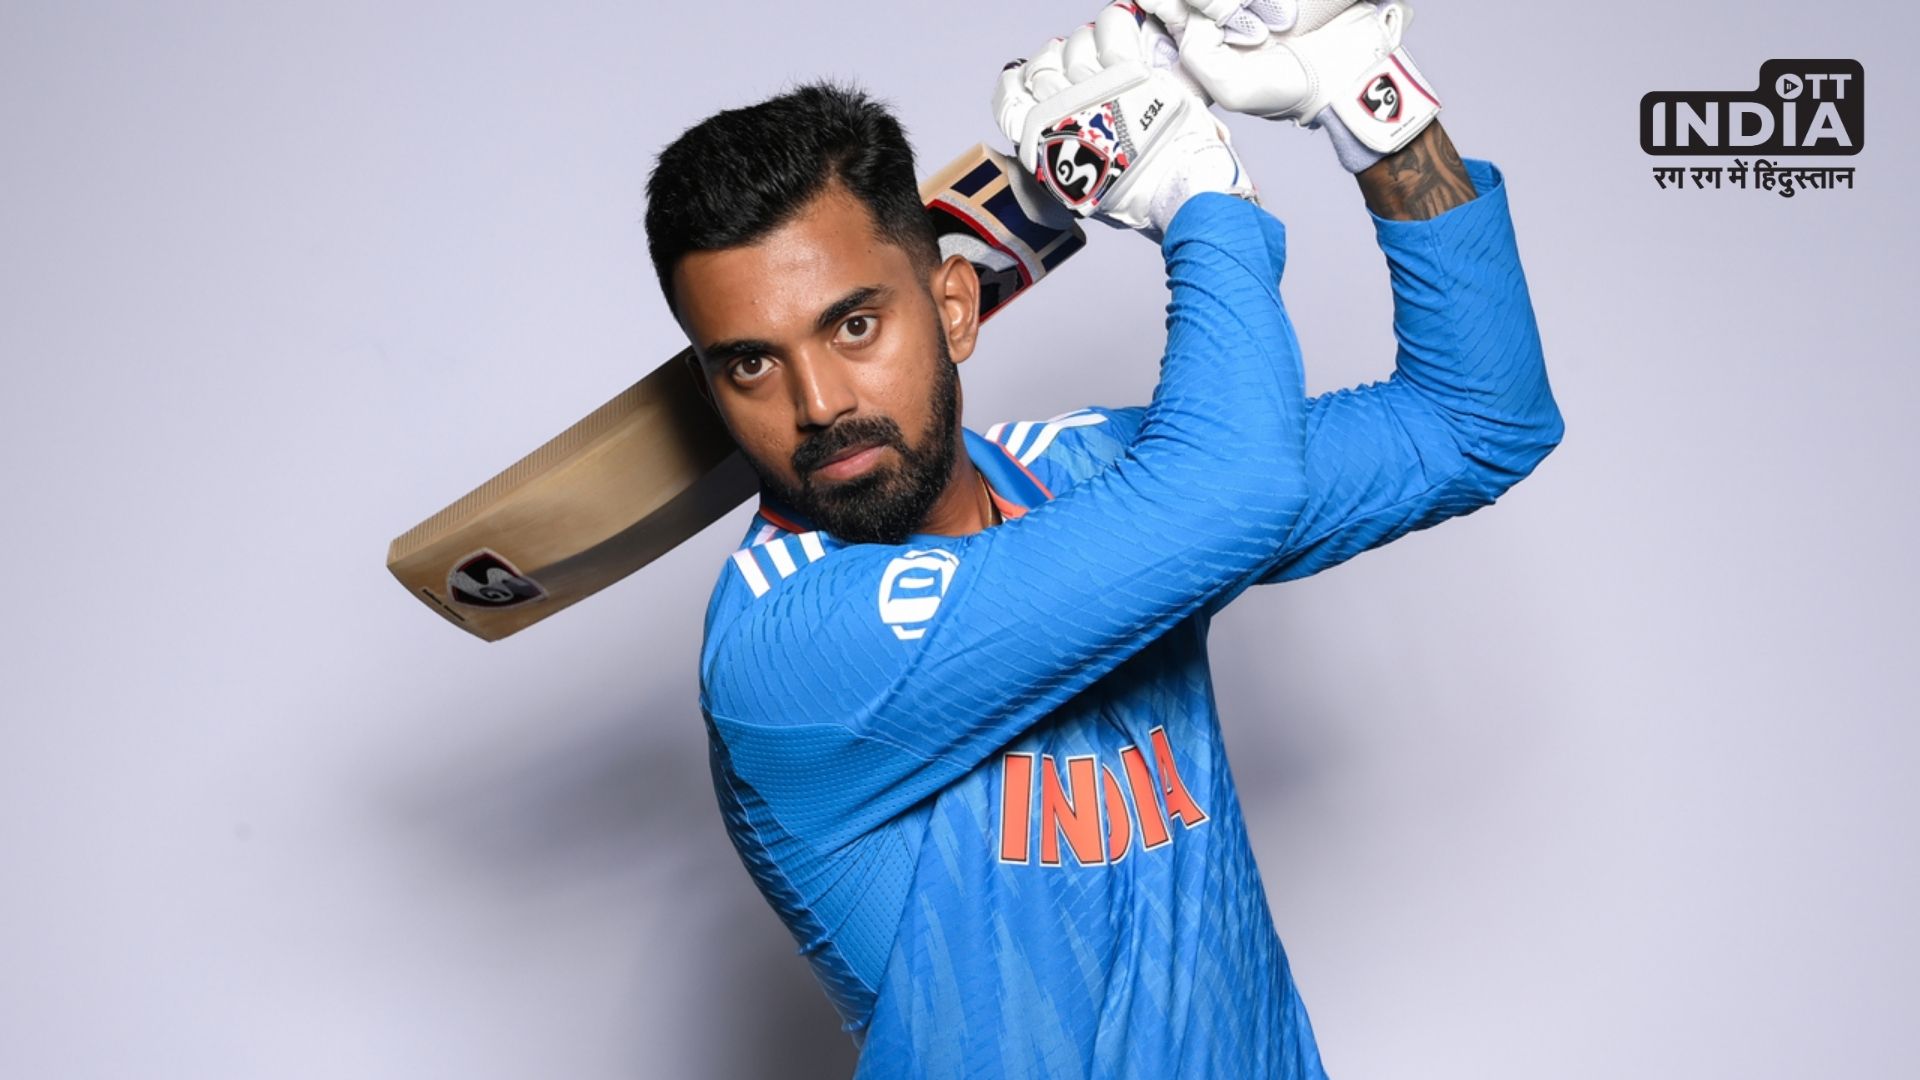 KL Rahul not selected in Team for Ind Vs Afg